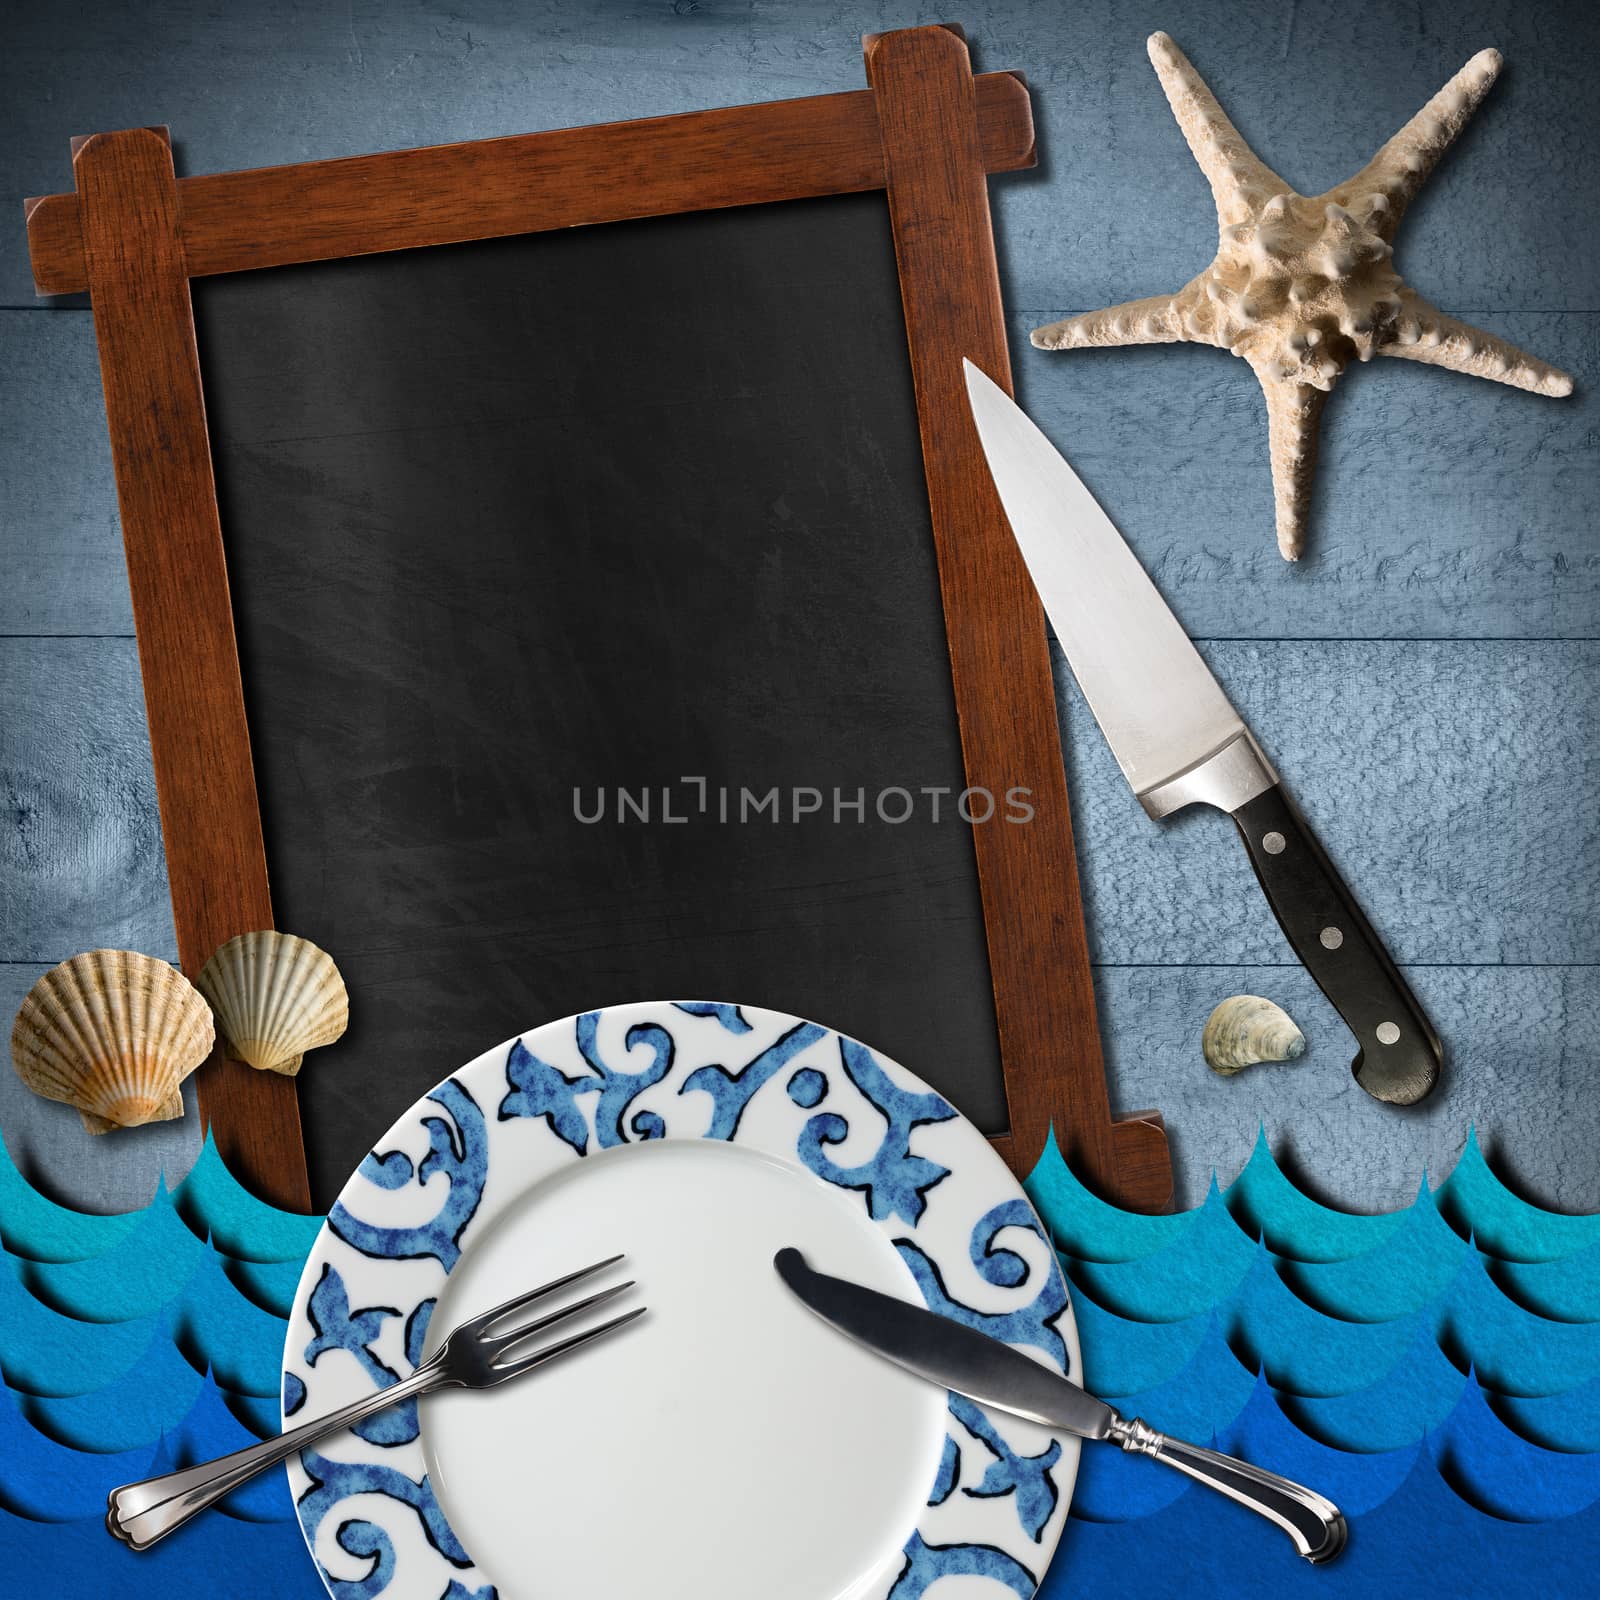 Blackboard with wooden frame, stylized sea waves, empty plate and cutlery, kitchen knife, seashells and starfish on blue wooden background. Template for recipes or seafood menu